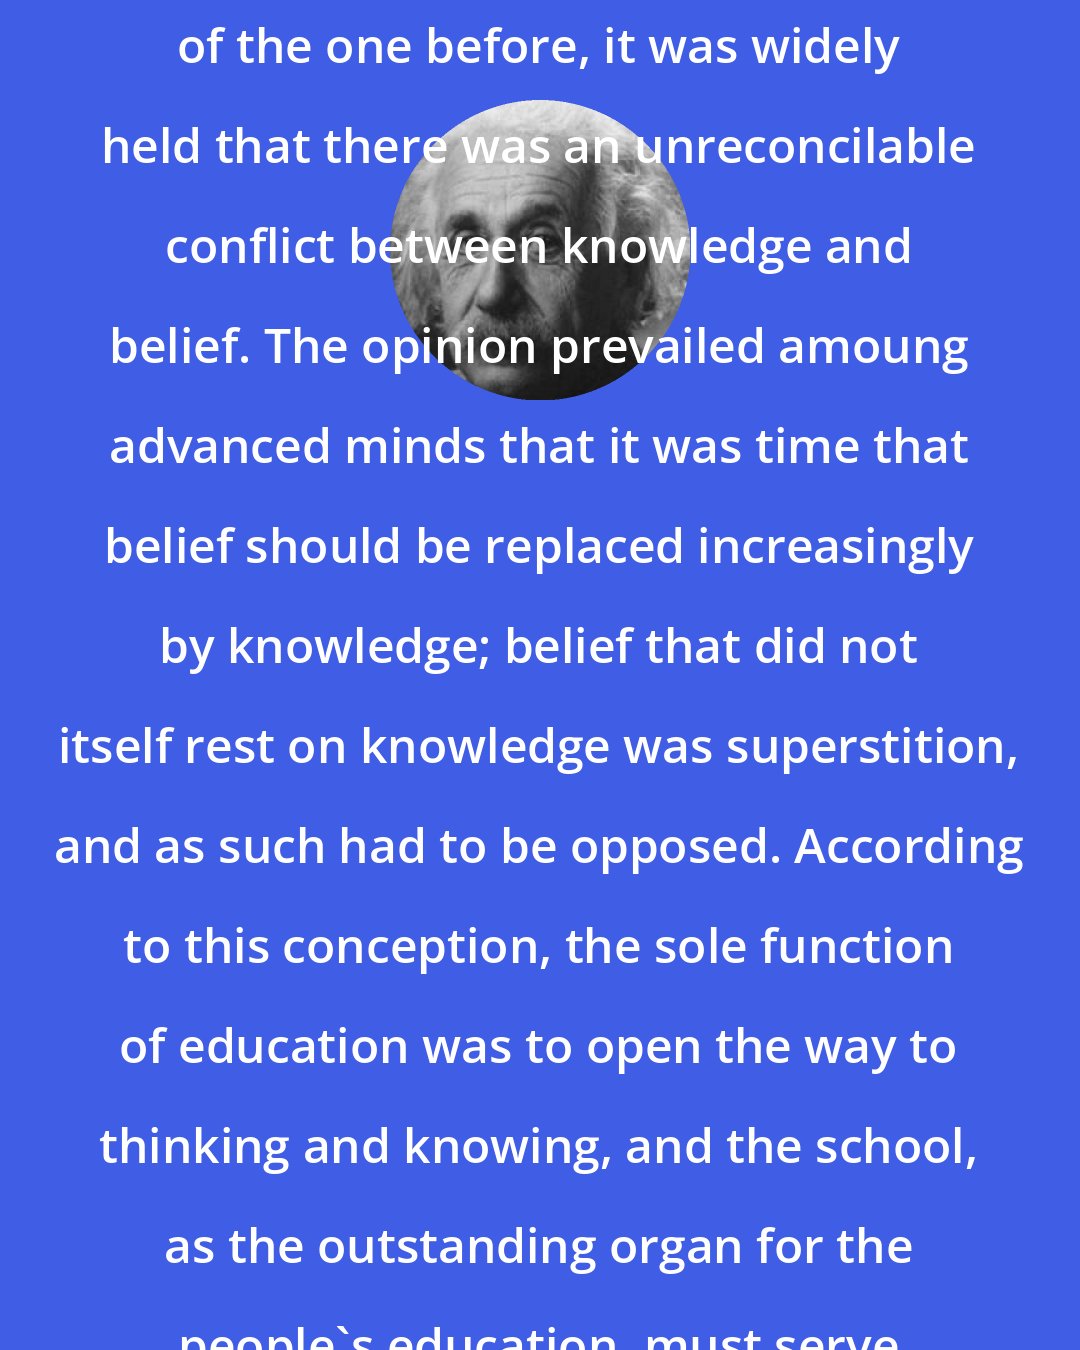 Albert Einstein: During the last century, and part of the one before, it was widely held that there was an unreconcilable conflict between knowledge and belief. The opinion prevailed amoung advanced minds that it was time that belief should be replaced increasingly by knowledge; belief that did not itself rest on knowledge was superstition, and as such had to be opposed. According to this conception, the sole function of education was to open the way to thinking and knowing, and the school, as the outstanding organ for the people's education, must serve that end exclusively.